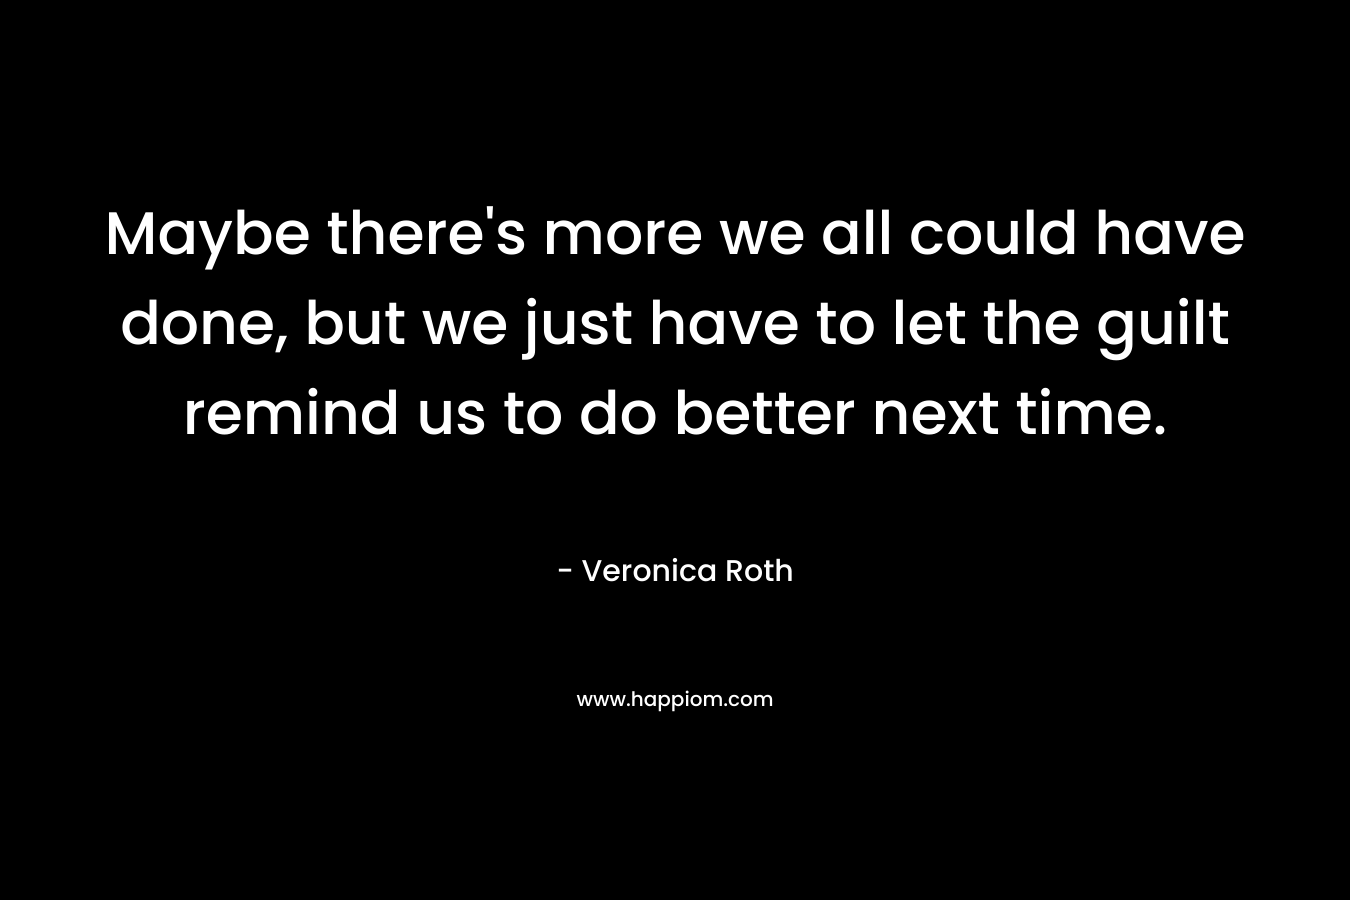 Maybe there’s more we all could have done, but we just have to let the guilt remind us to do better next time. – Veronica Roth